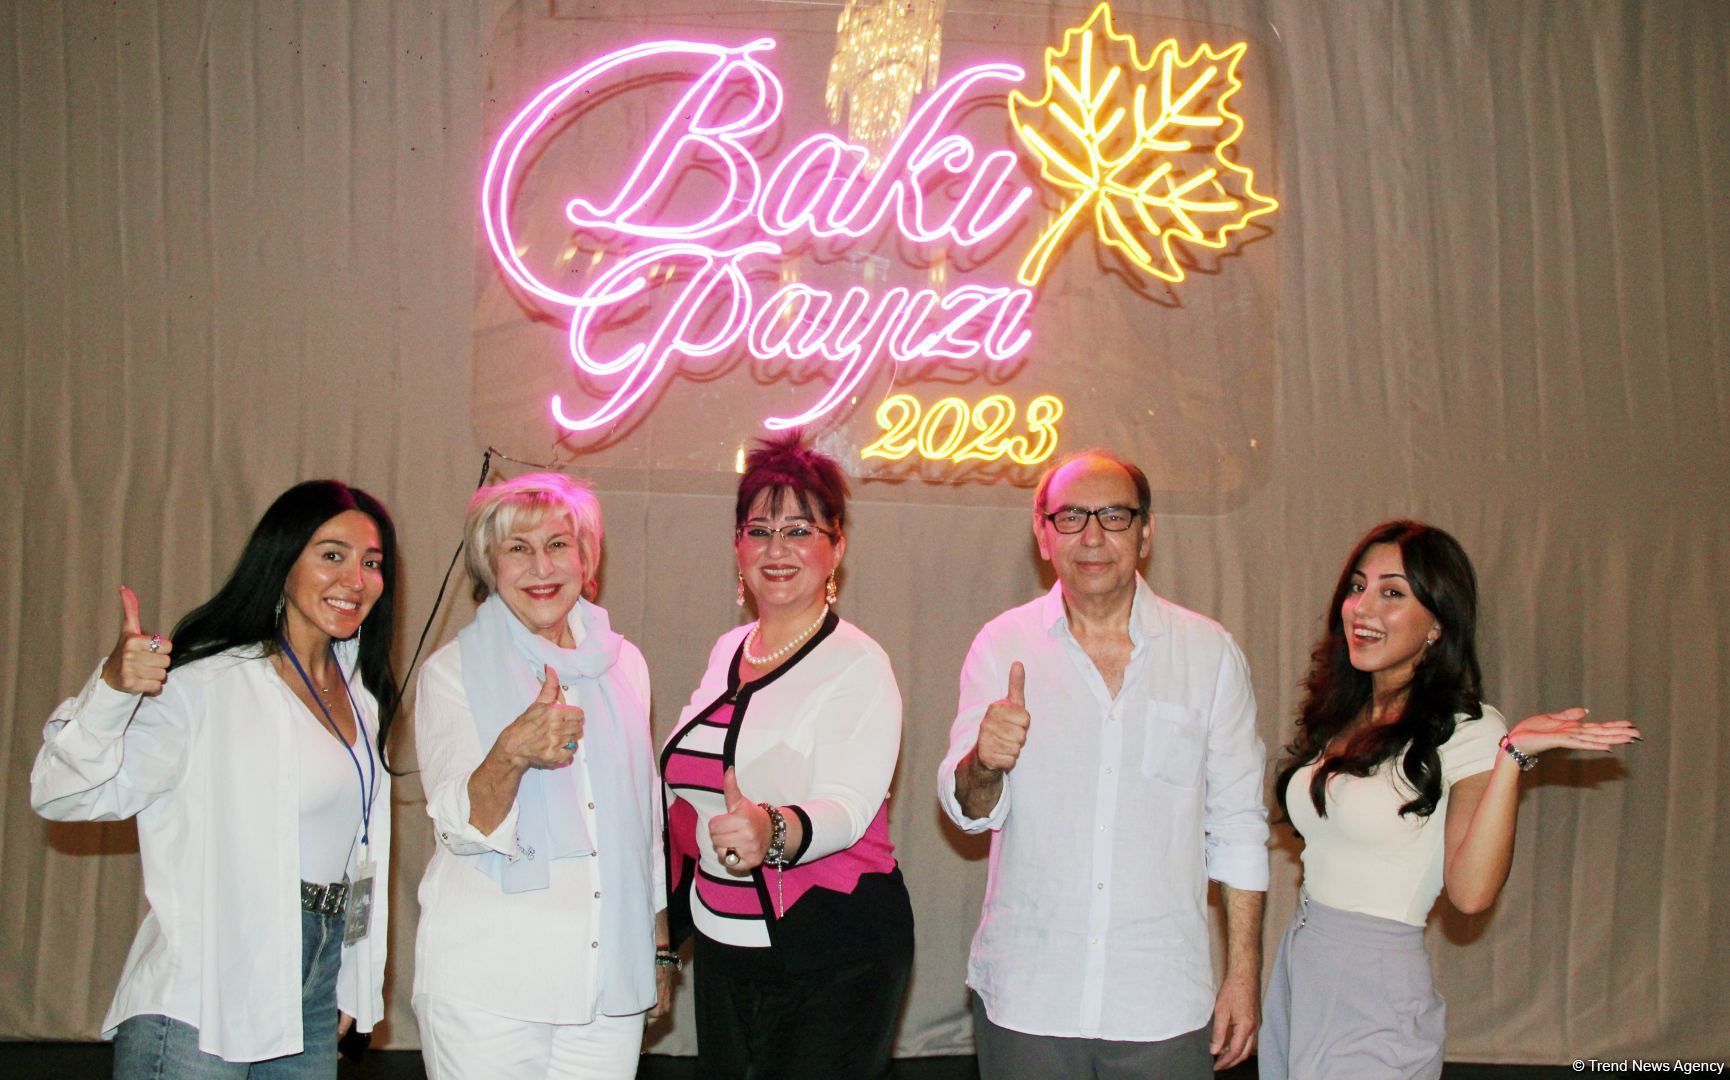 Promo event held within talent show 'Baku Autumn-2023. 35 years later' [PHOTOS/VIDEOS]